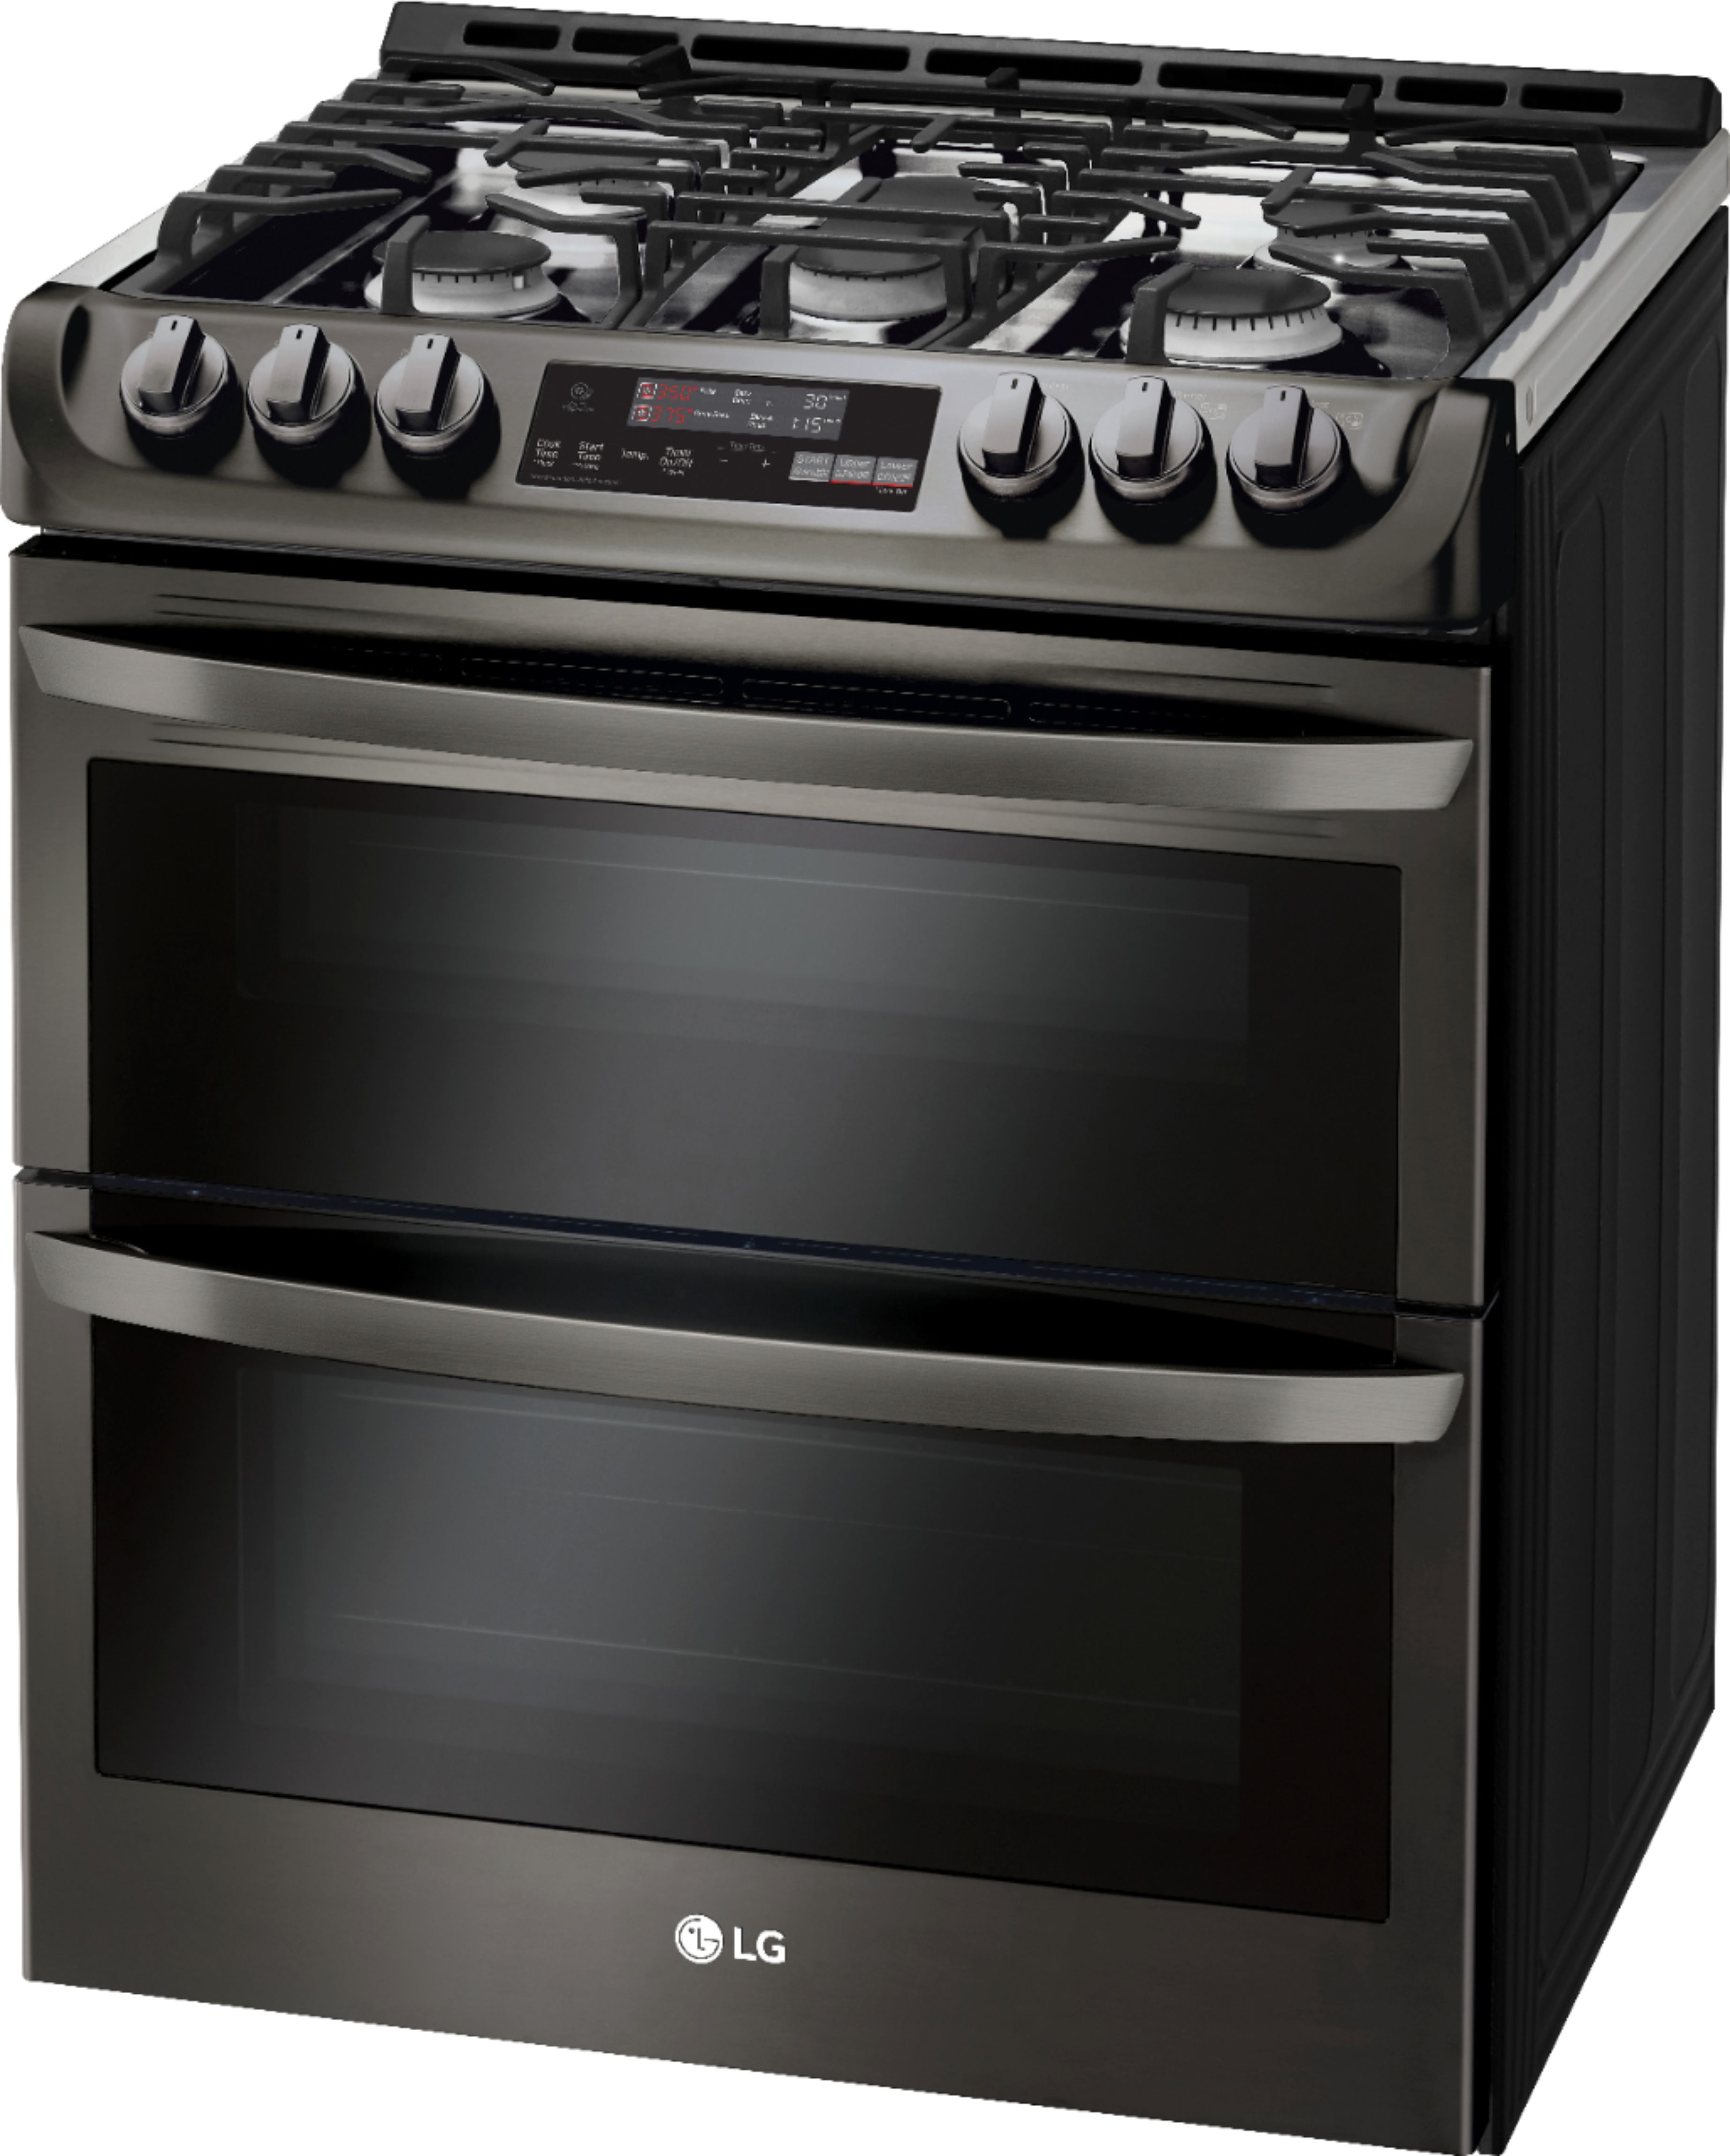 Left View: LG - 6.9 Cu. Ft. Slide-In Double Oven Gas True Convection Range with EasyClean and ThinQ Technology - Black Stainless Steel